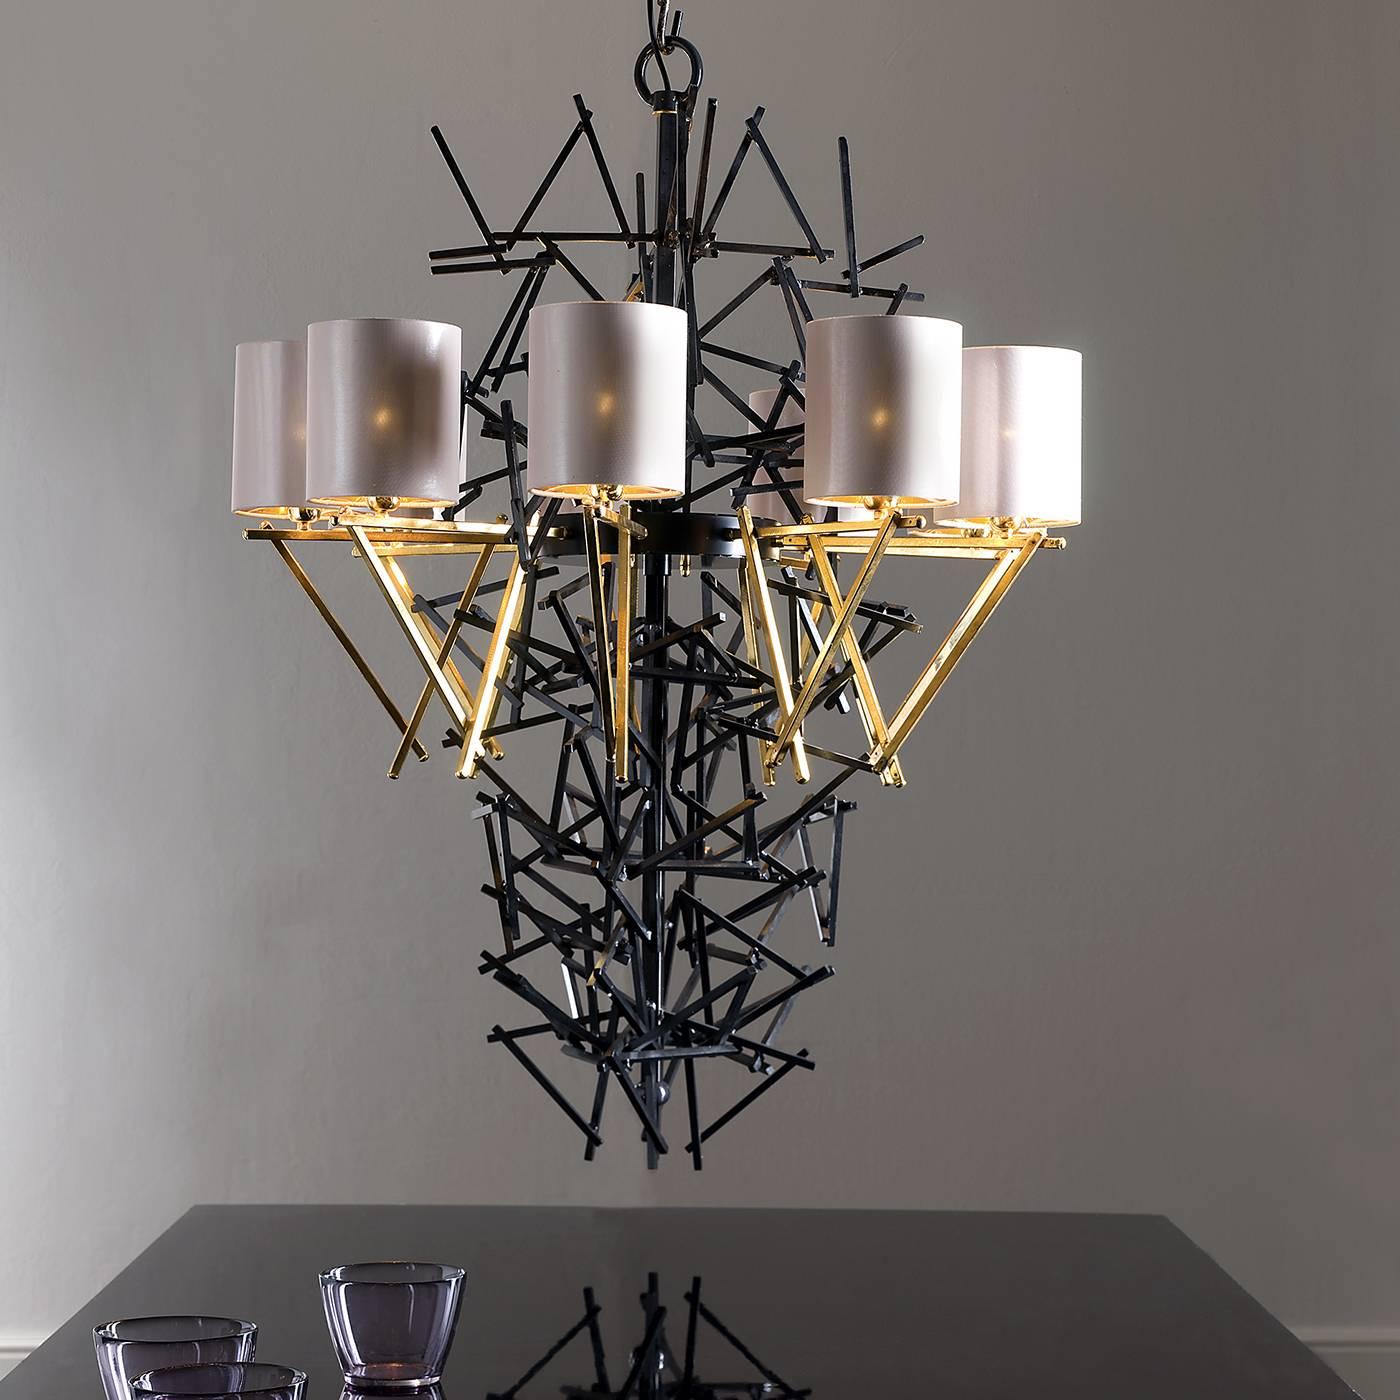 The striking design of this unique chandelier will make a striking statement when placed in a home and it is also ideal for use in public spaces. Its construction consists of a variety of chopstick-shaped rods of iron which have been soldered